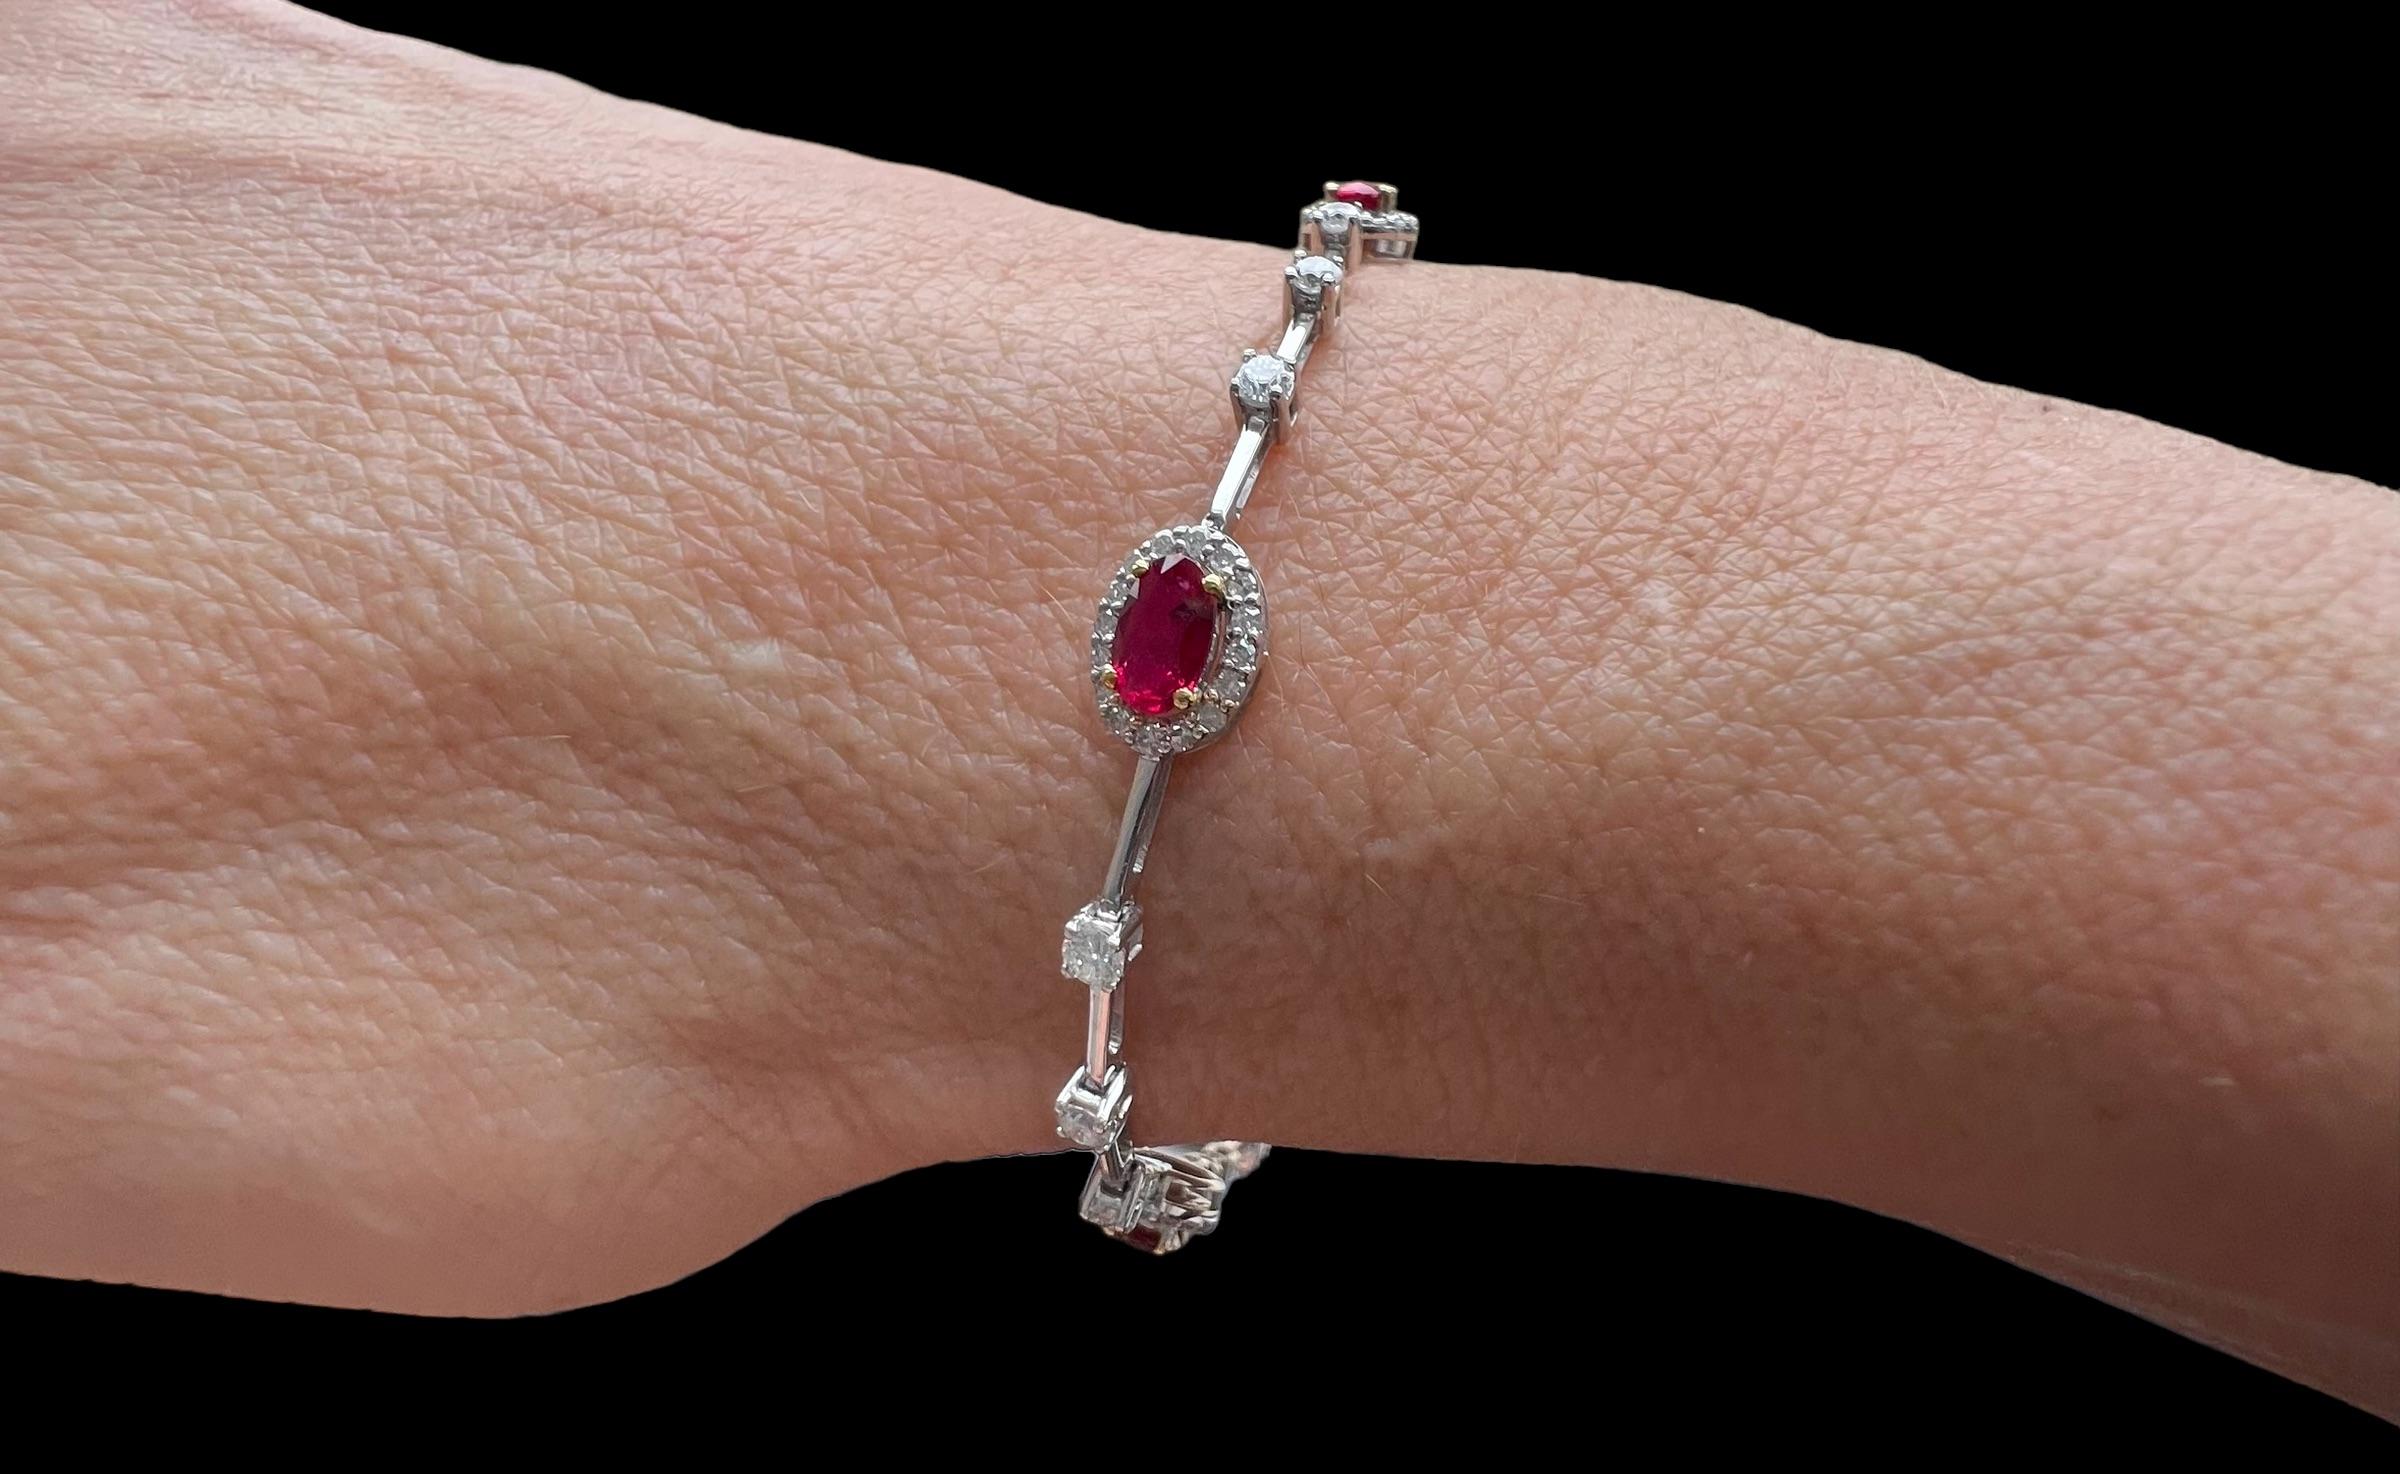 18-carat white gold bracelet set with 5 oval and faceted rubies;
This jewel comes from France, it must date from the 1980s/1990s, it can be reminiscent of the Art Deco style 1930s, because of its refined line where rubies are highlighted by an